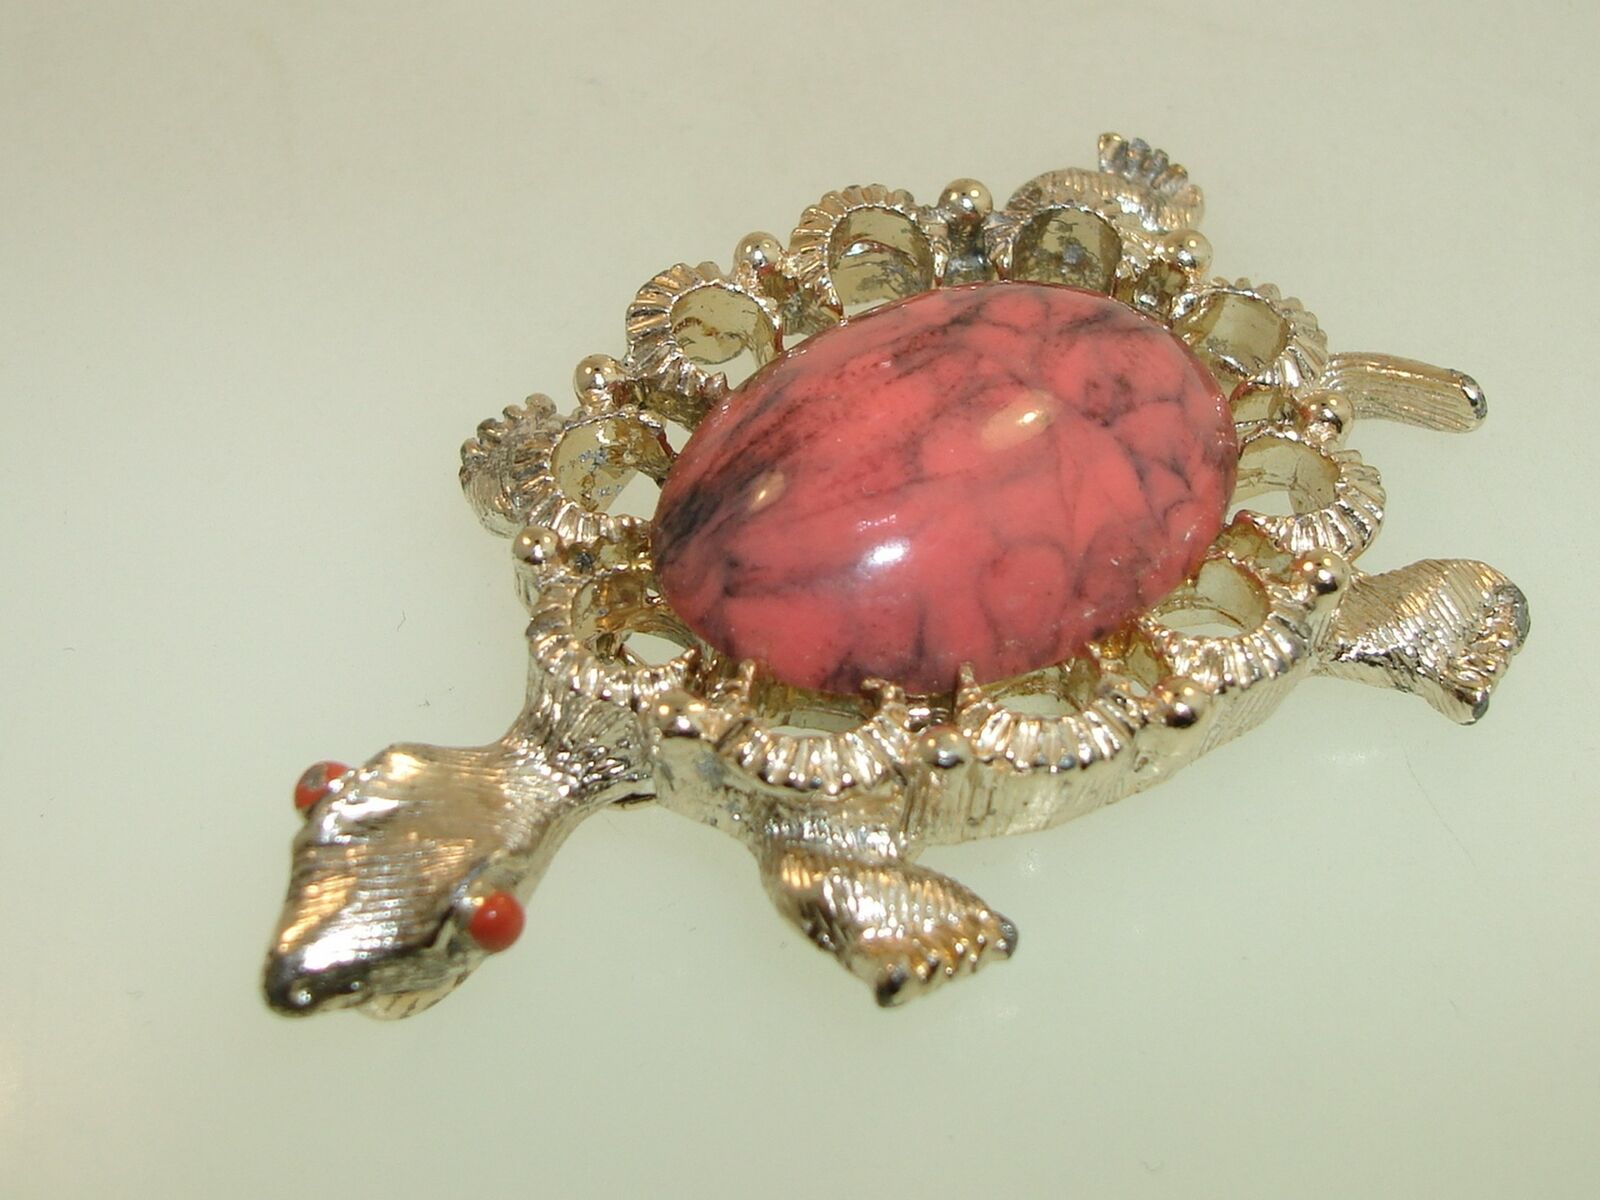 VINTAGE "GERRY'S" TURTLE WITH MOTTLED LUCITE BODY… - image 1